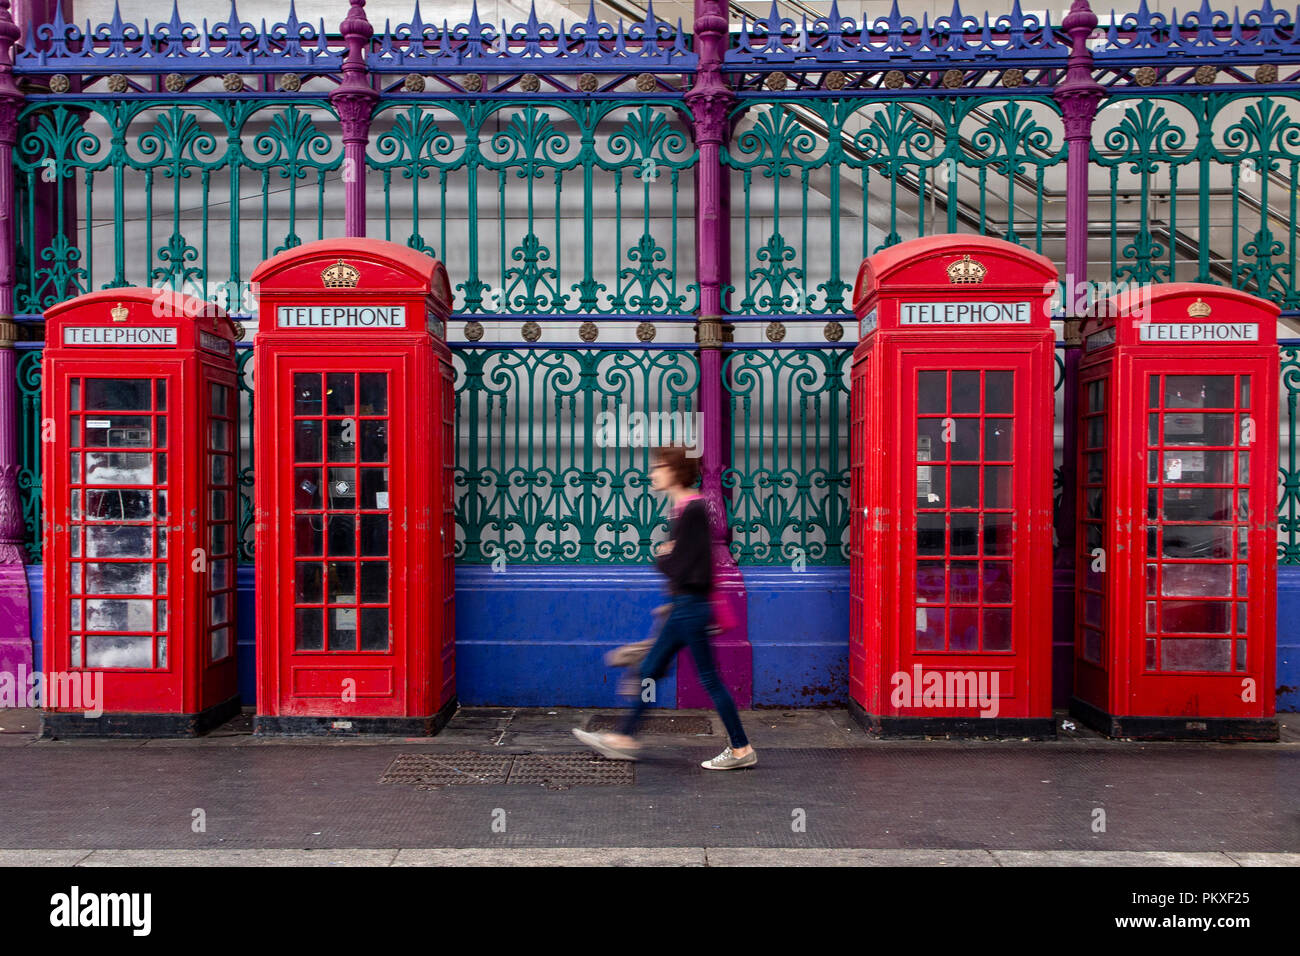 Iconic telephone boxes in an iconic location in the City of London with blurred passers by Stock Photo